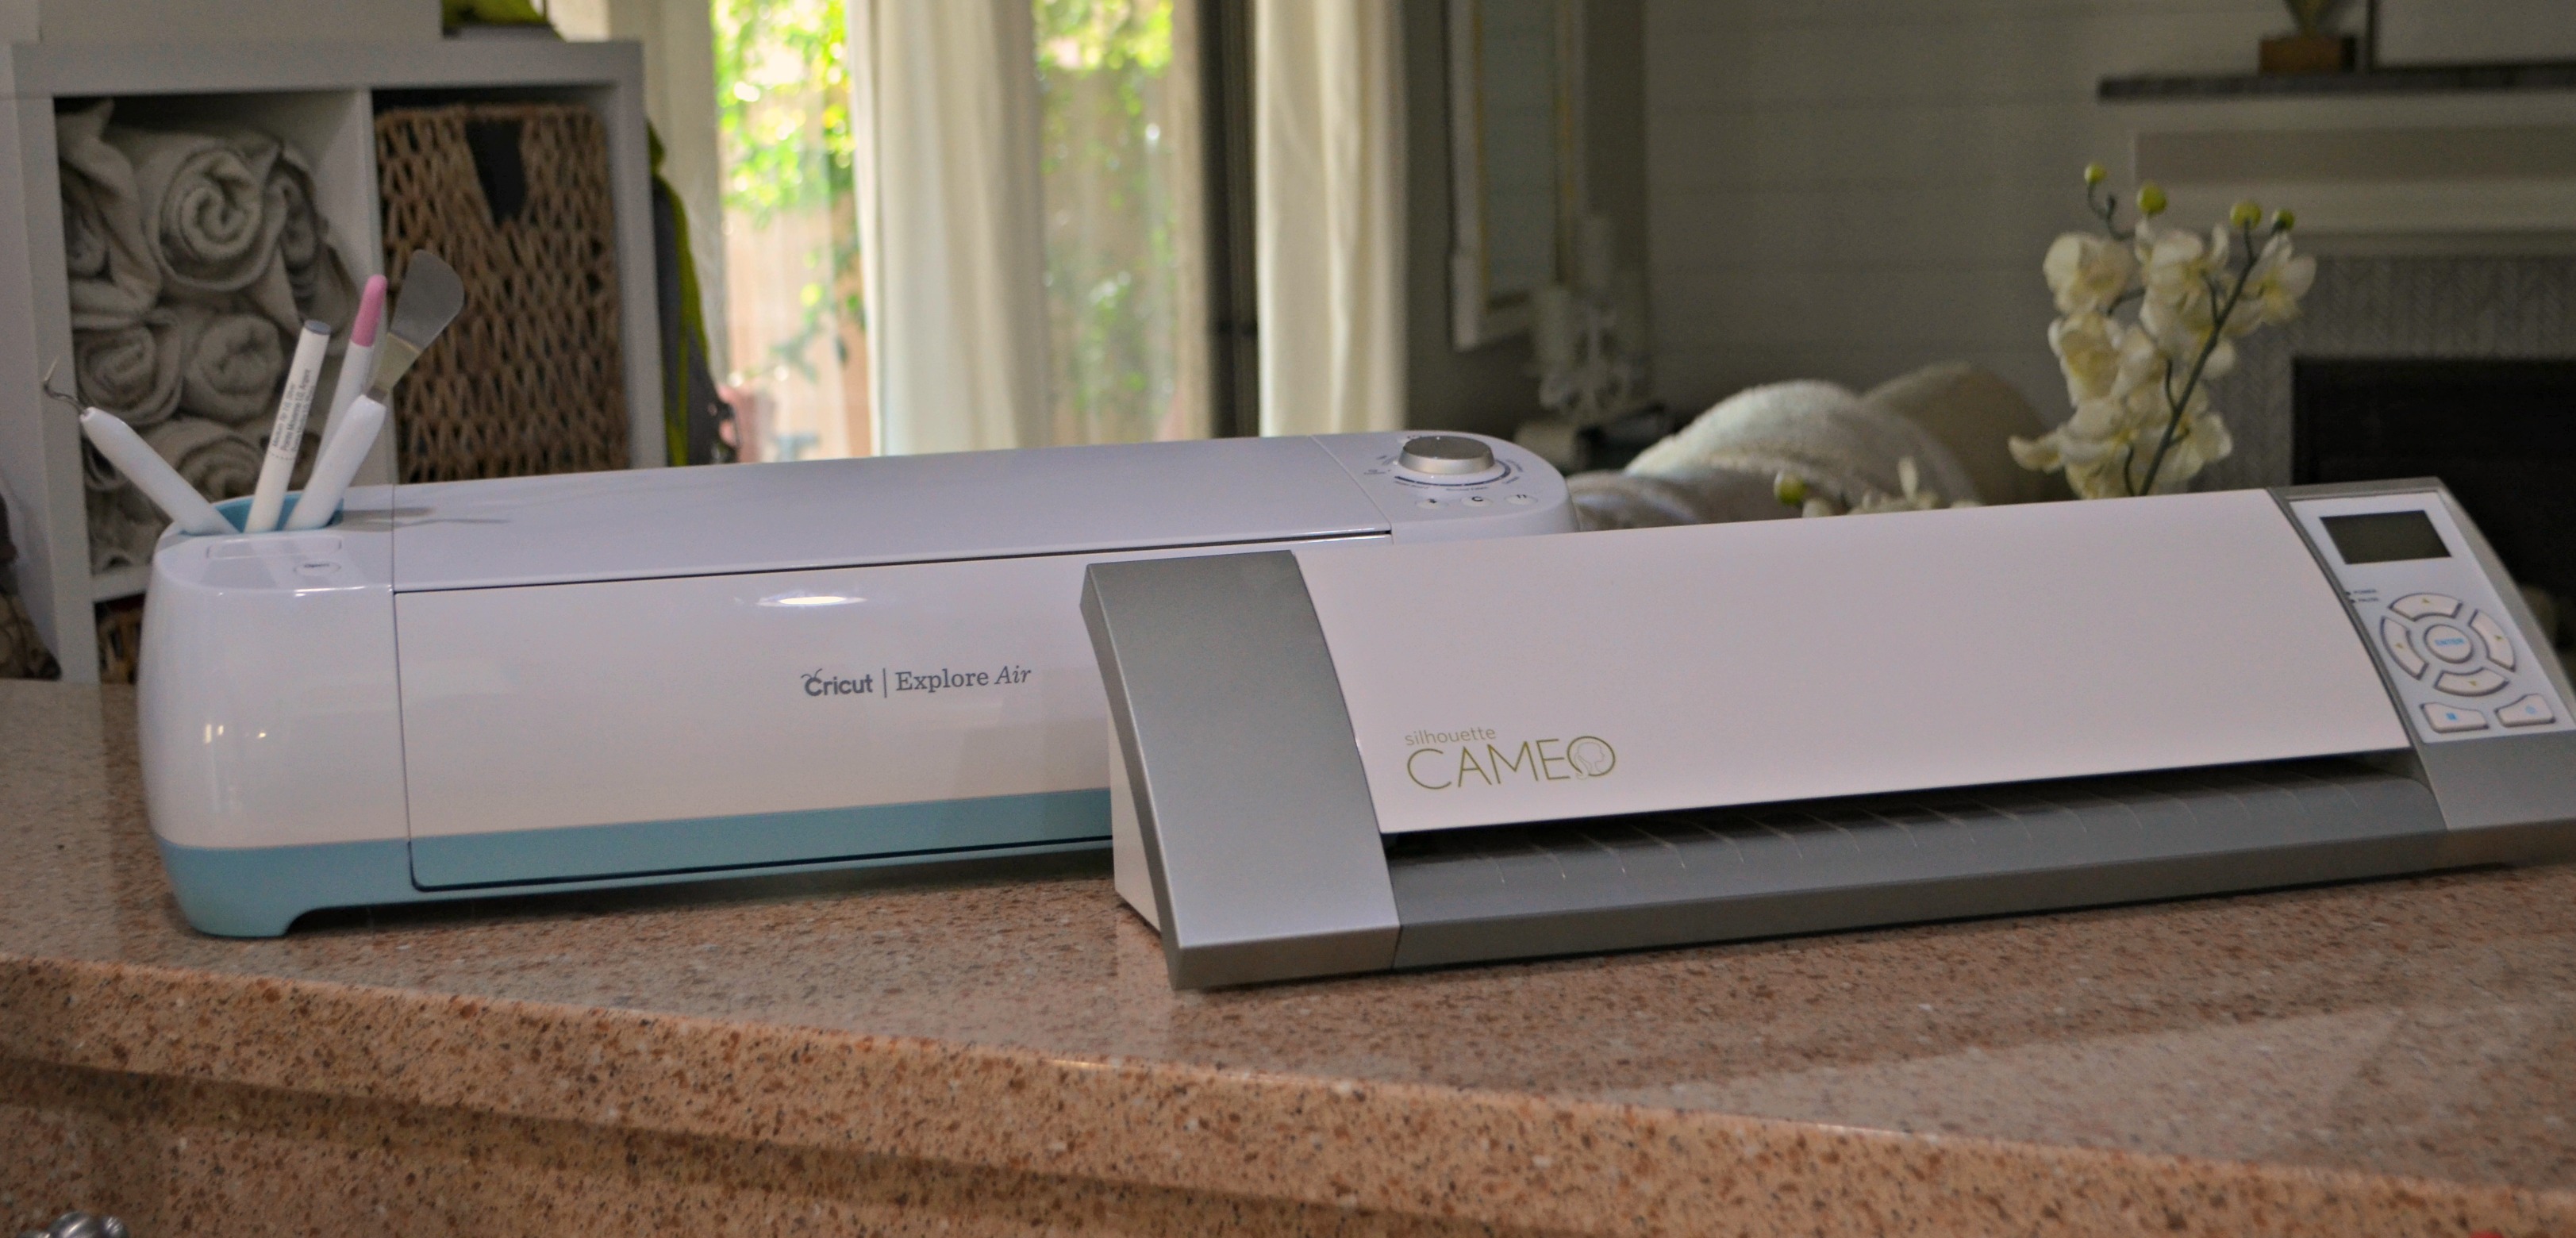 Cricut and Silhouette are both about the size of a large, compact printer.